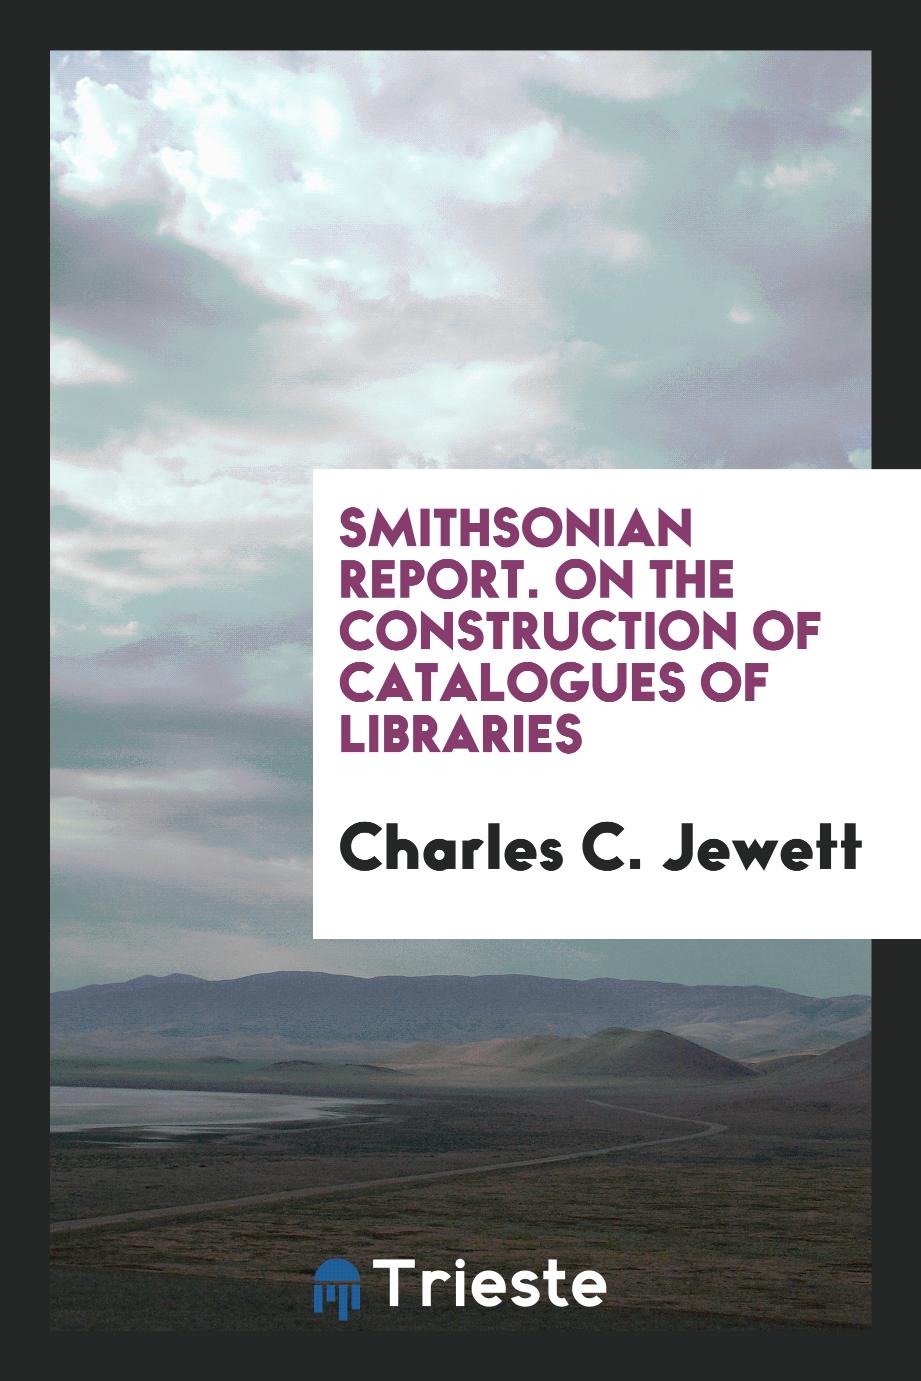 Smithsonian Report. On the Construction of Catalogues of Libraries